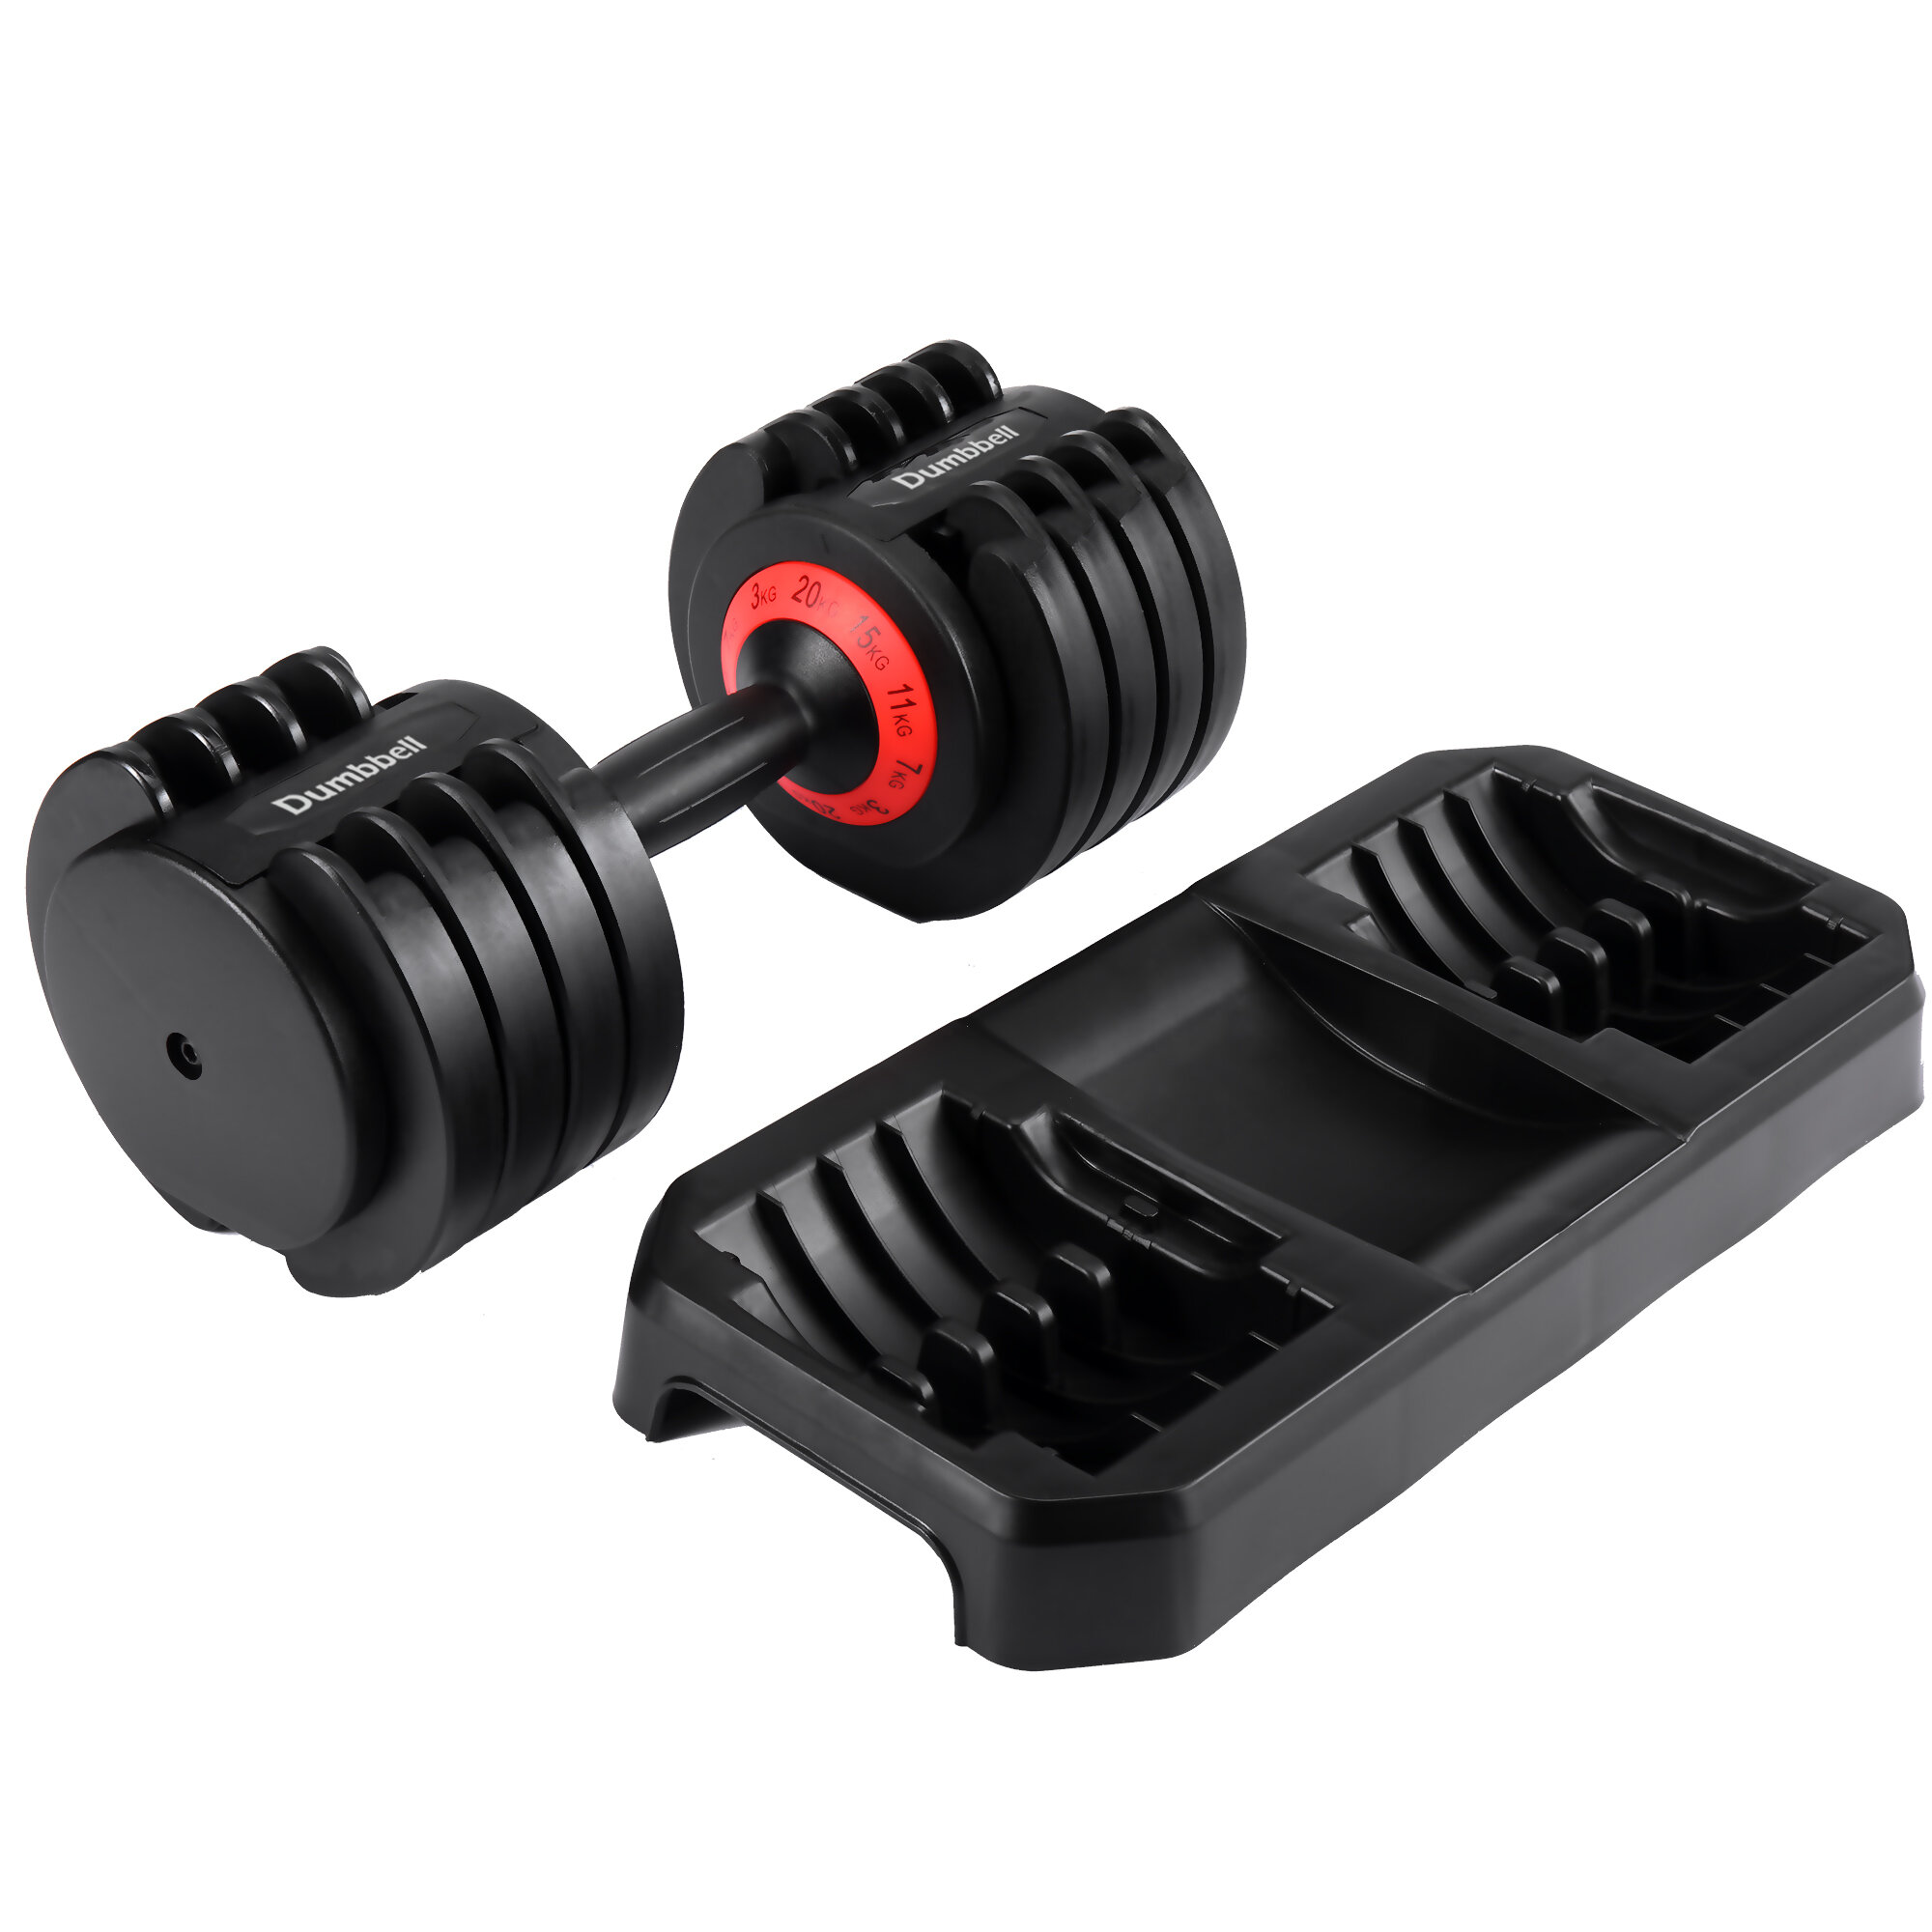 [USA Direct] Adjustable Dumbbell 6.6-44lbs Non-slip Exercise Strength Training Tools with Dumbbell Tray Home Gym